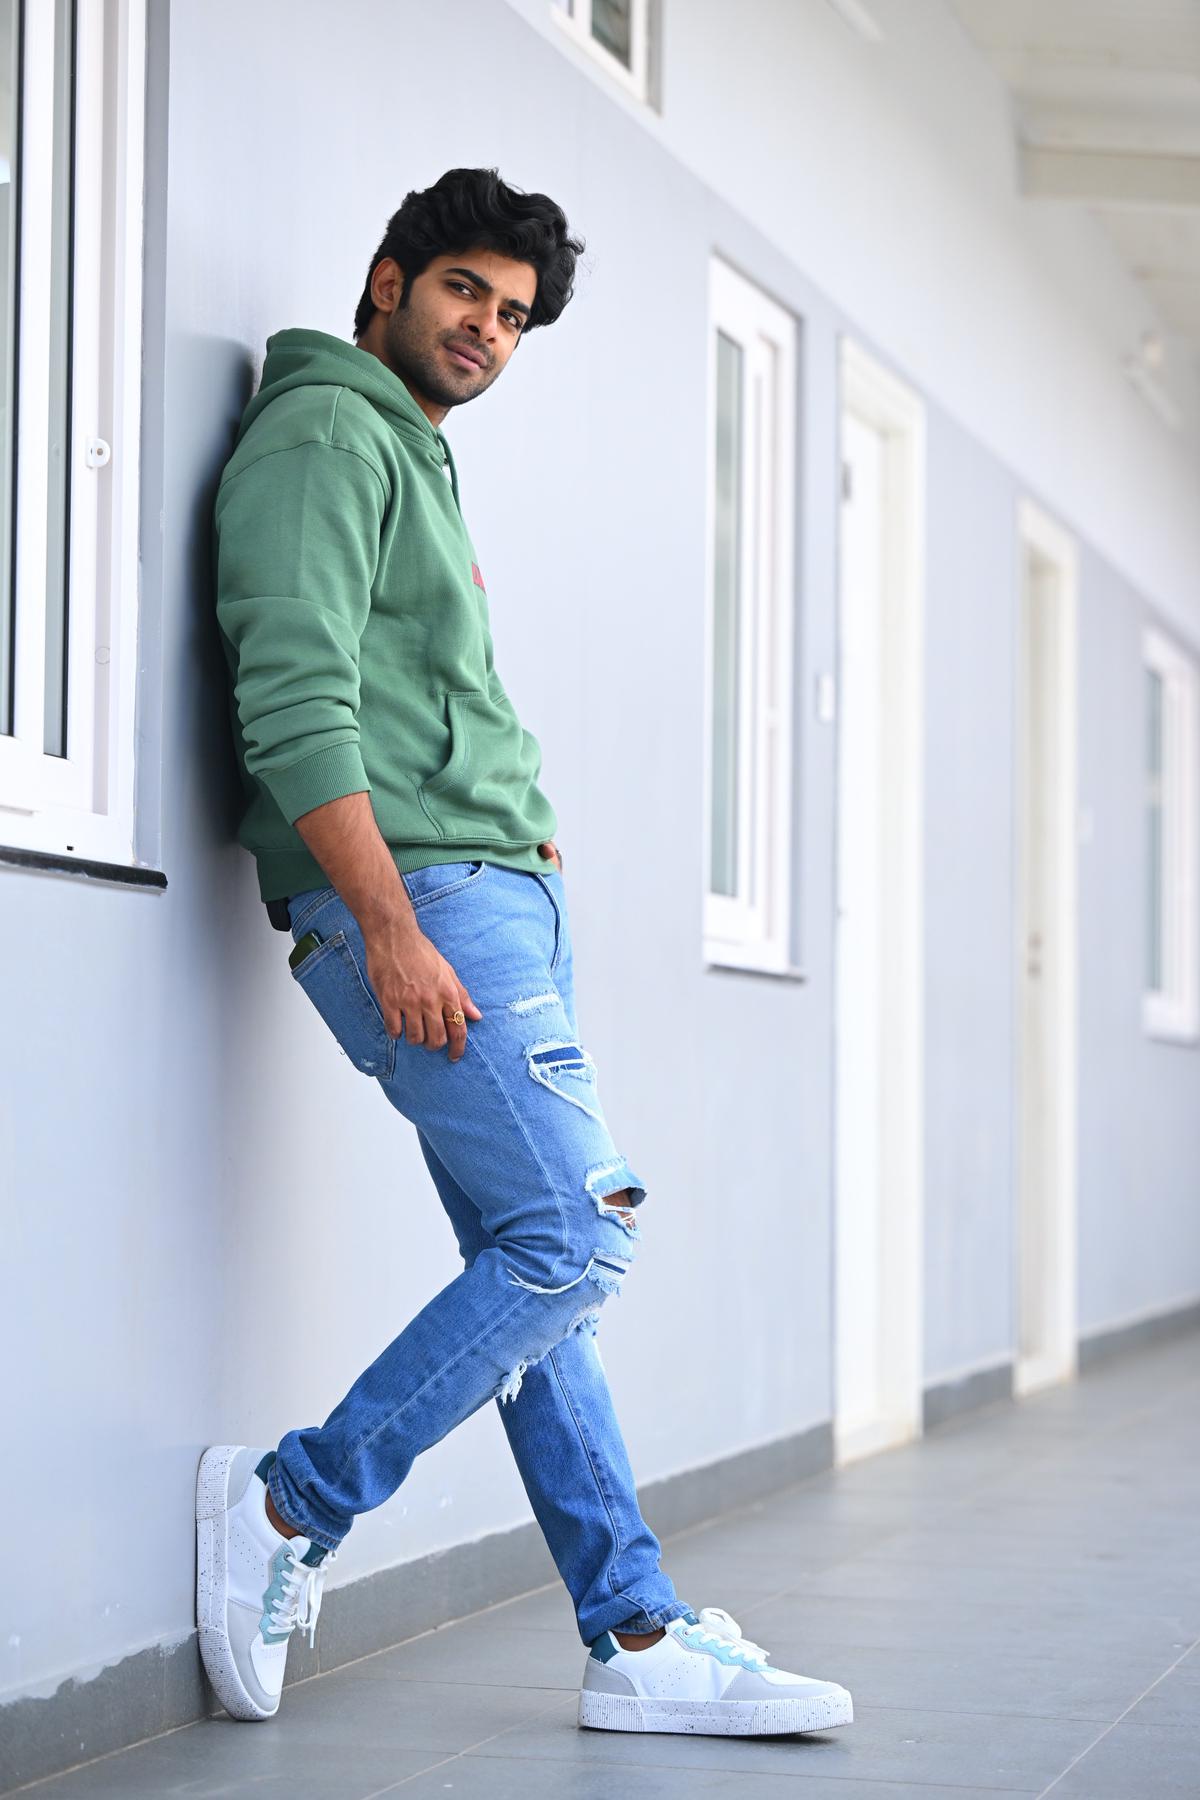 Dheekshith Shetty shares screen space with Nani and Keerthy Suresh in their upcoming release